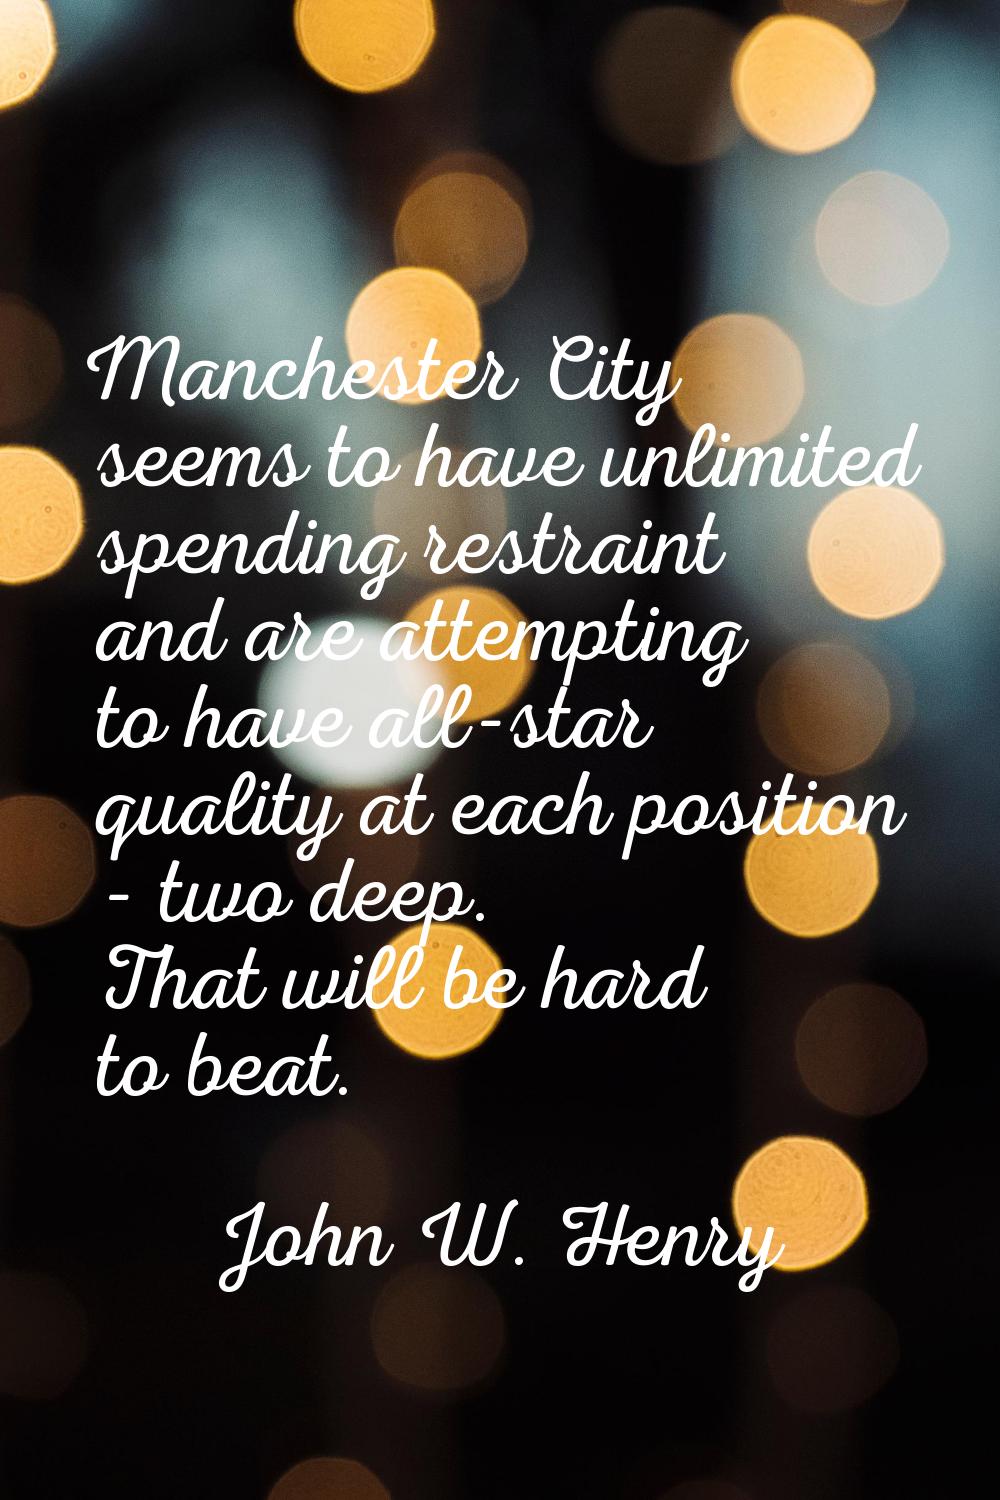 Manchester City seems to have unlimited spending restraint and are attempting to have all-star qual